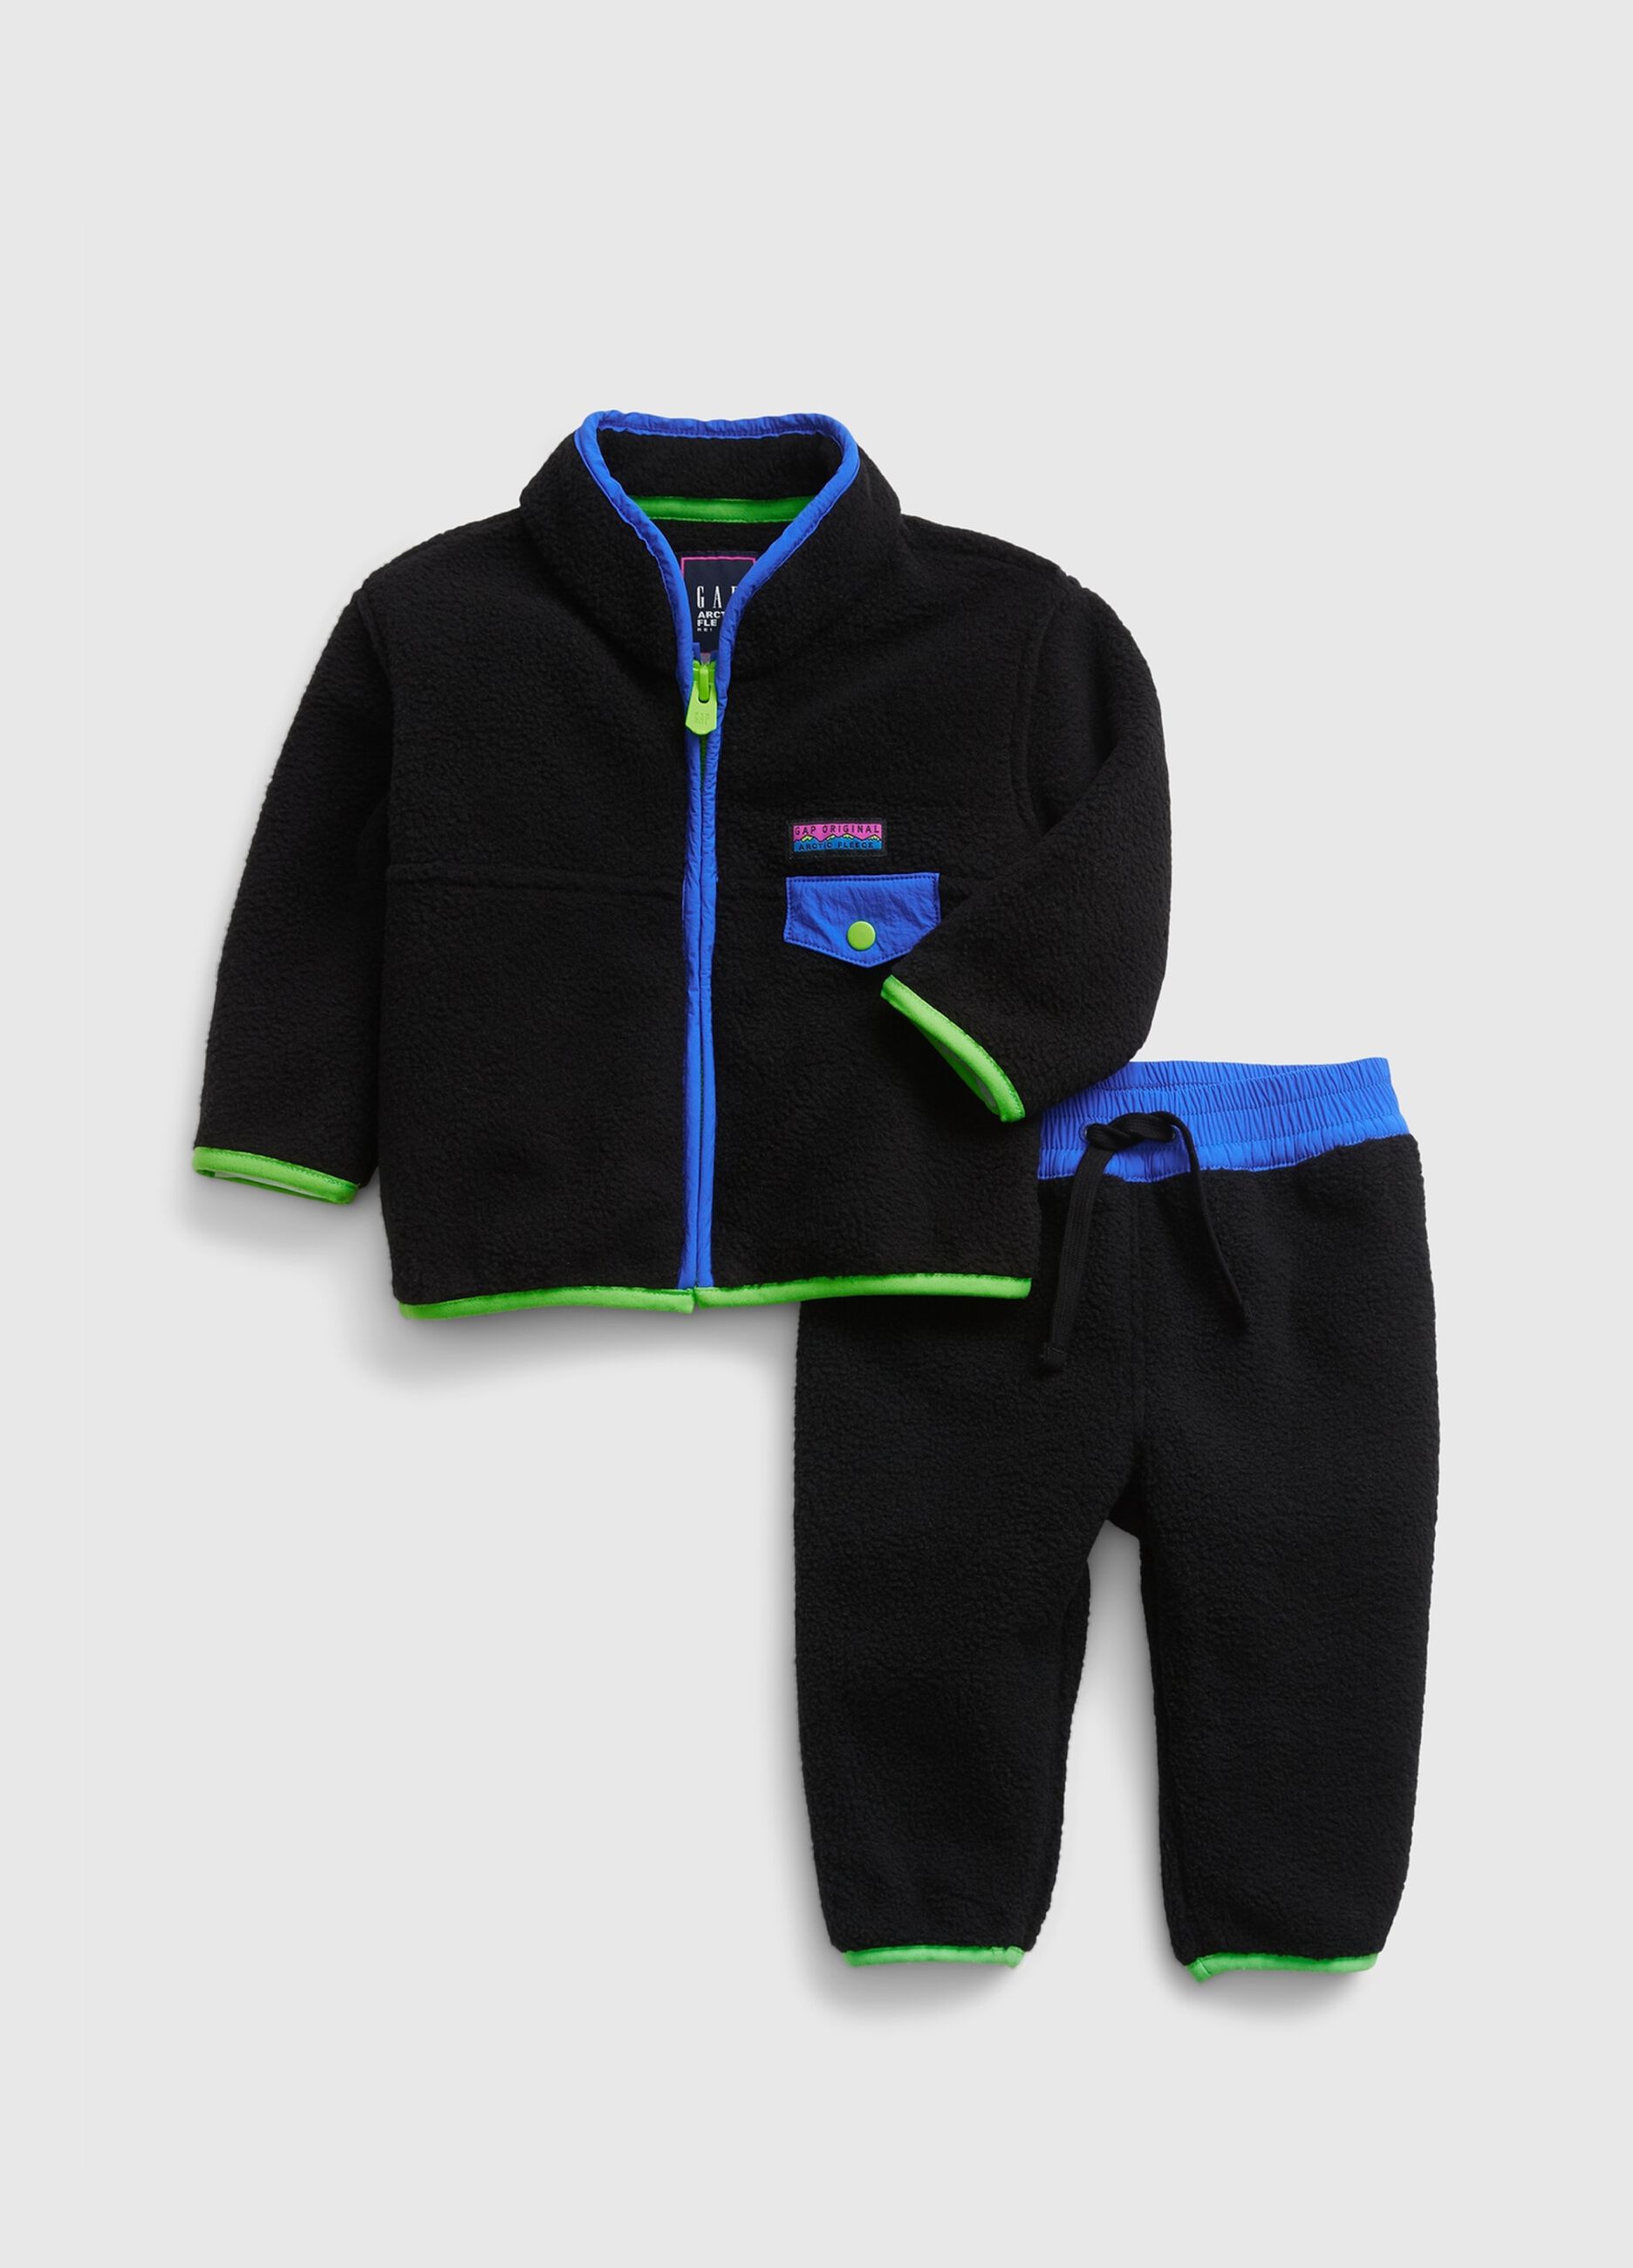 Fleece outfit with contrasting trims